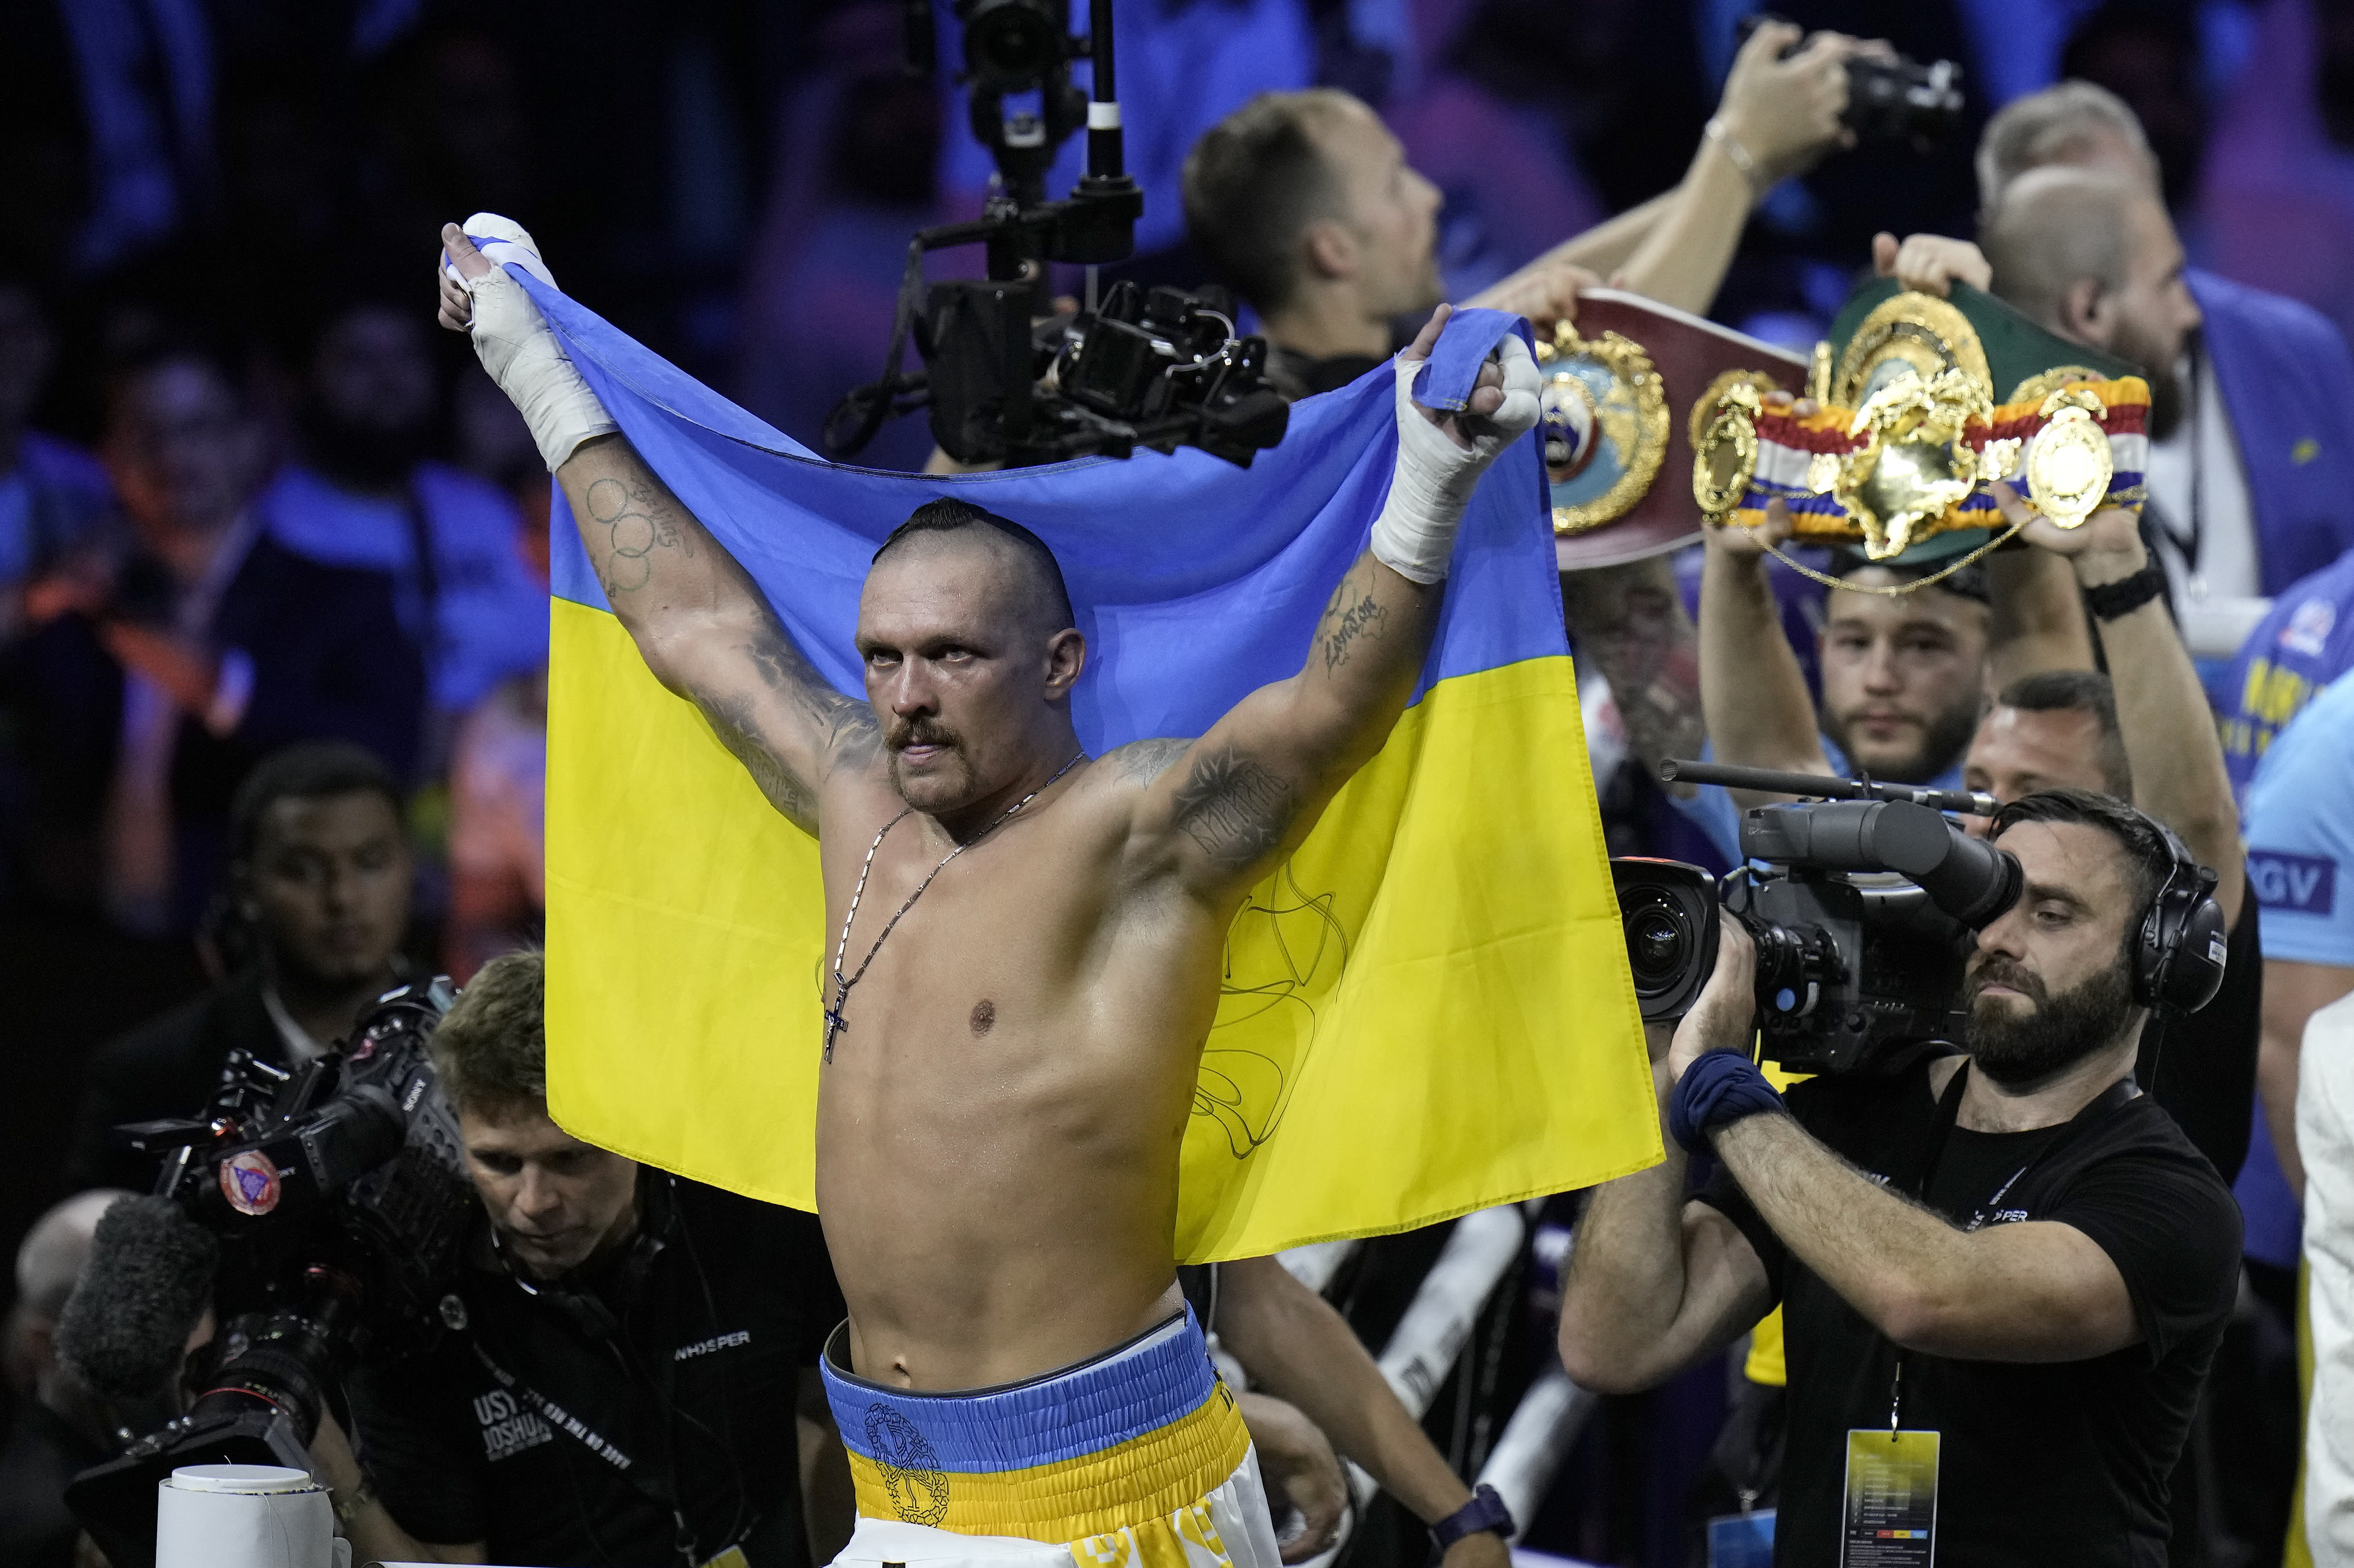 Usyk will no longer be undisputed world heavyweight champion after vacating IBF belt